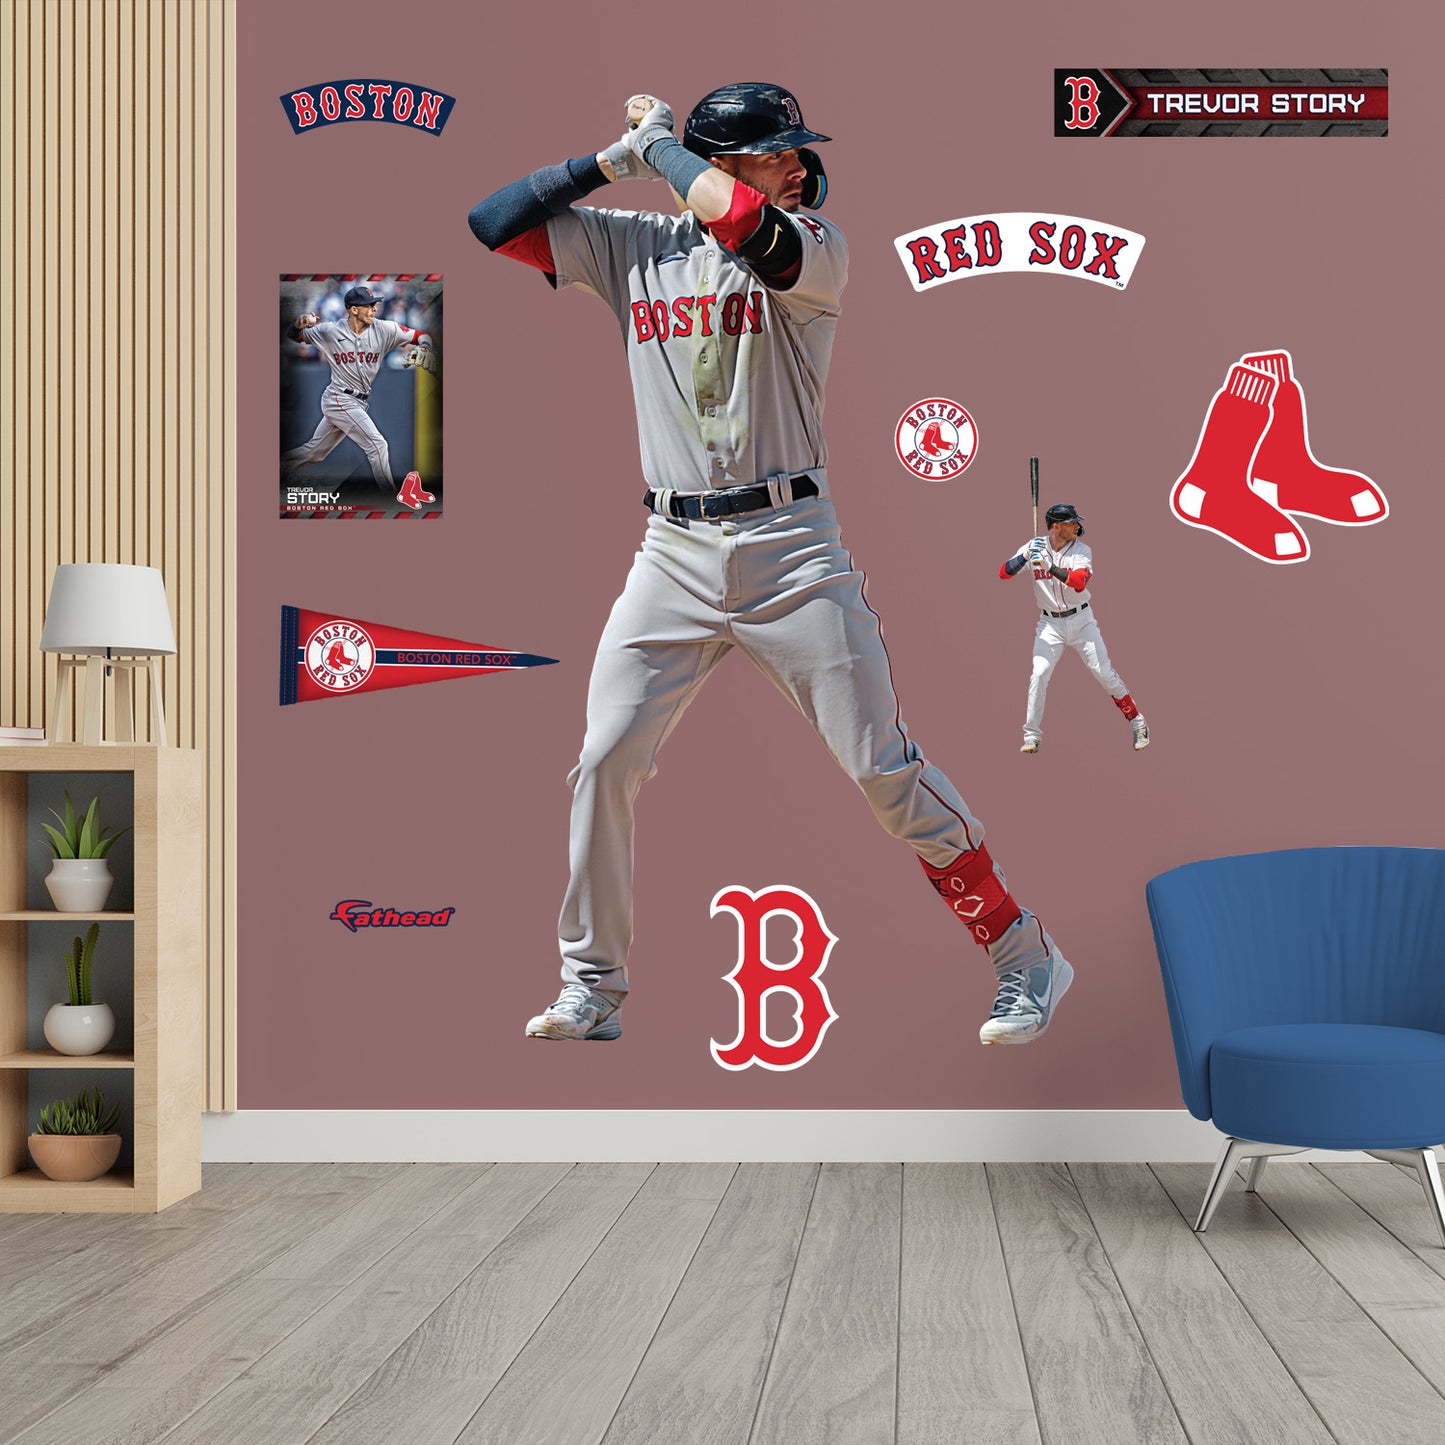 Fathead Boston Red Sox Giant Removable Decal 